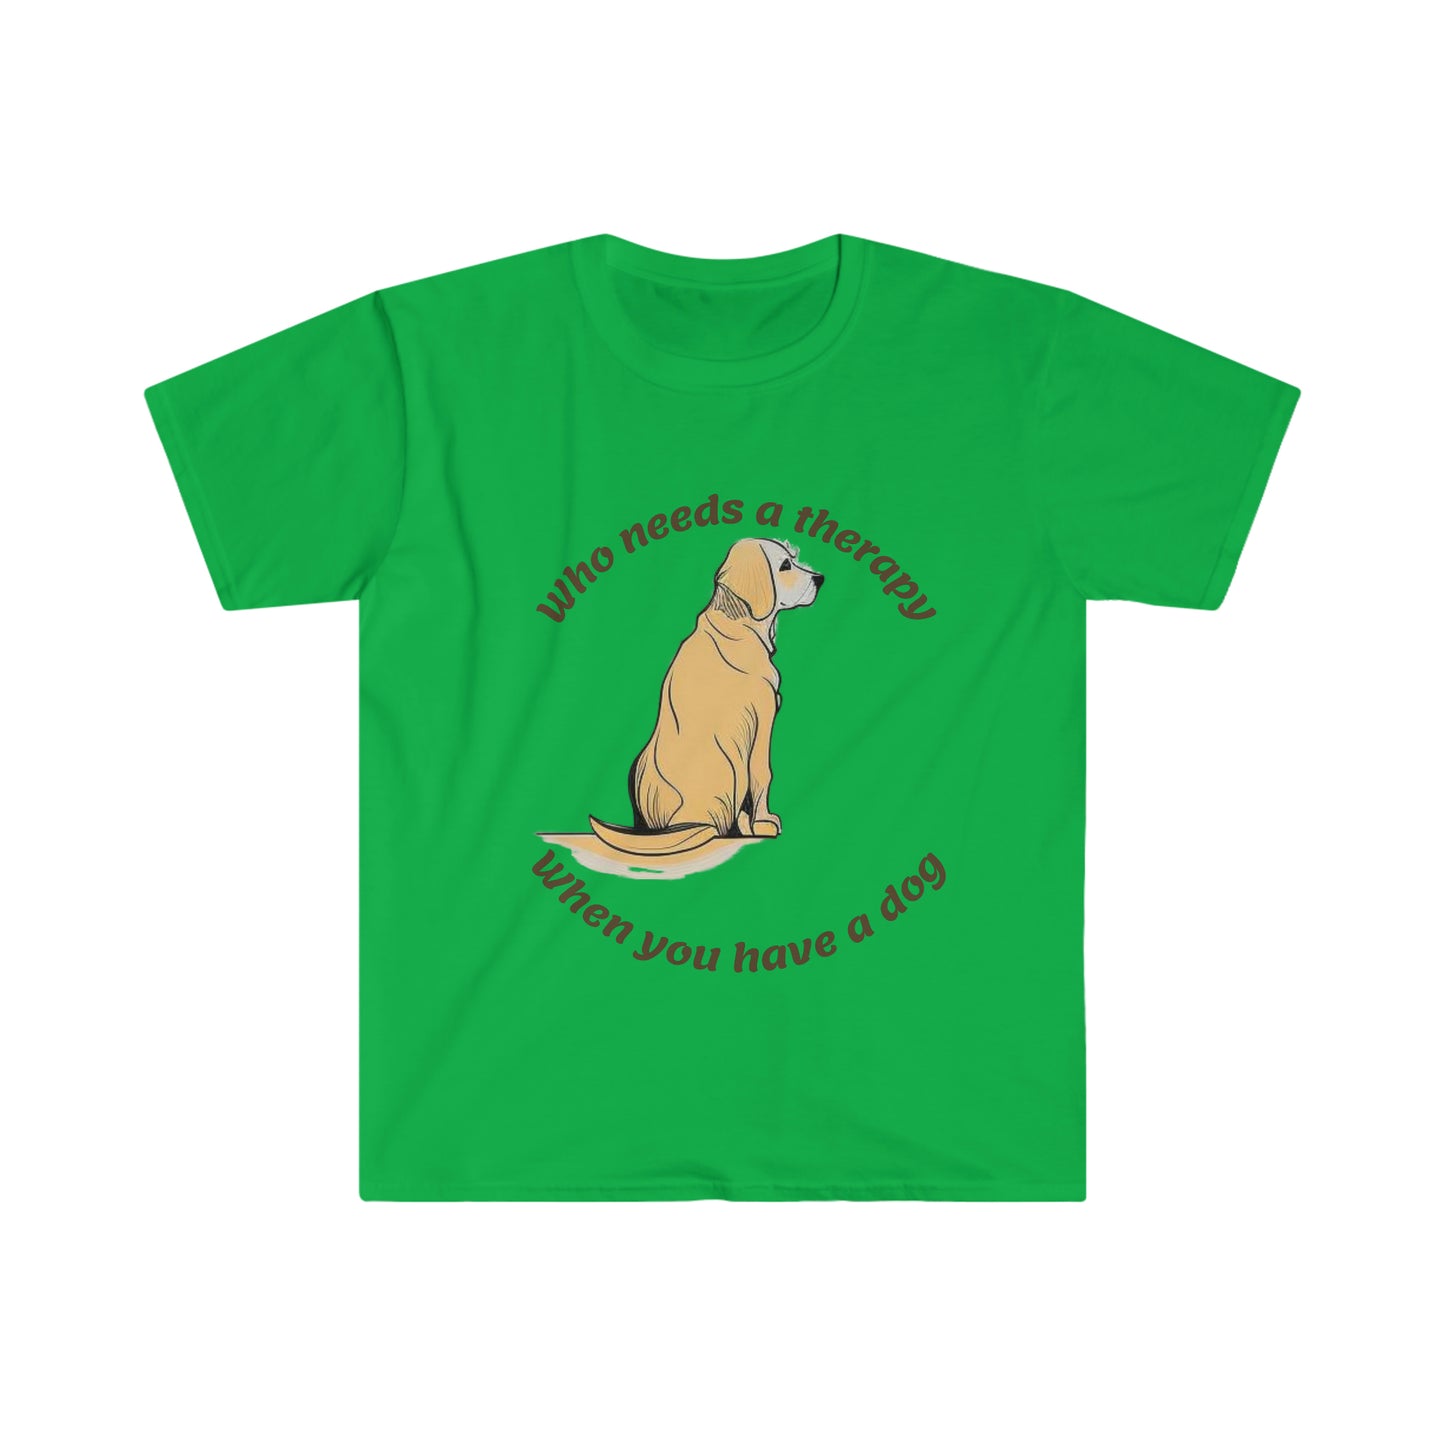 "Who Needs A Therapy When You Have A Dog" Essential Comfort Tee